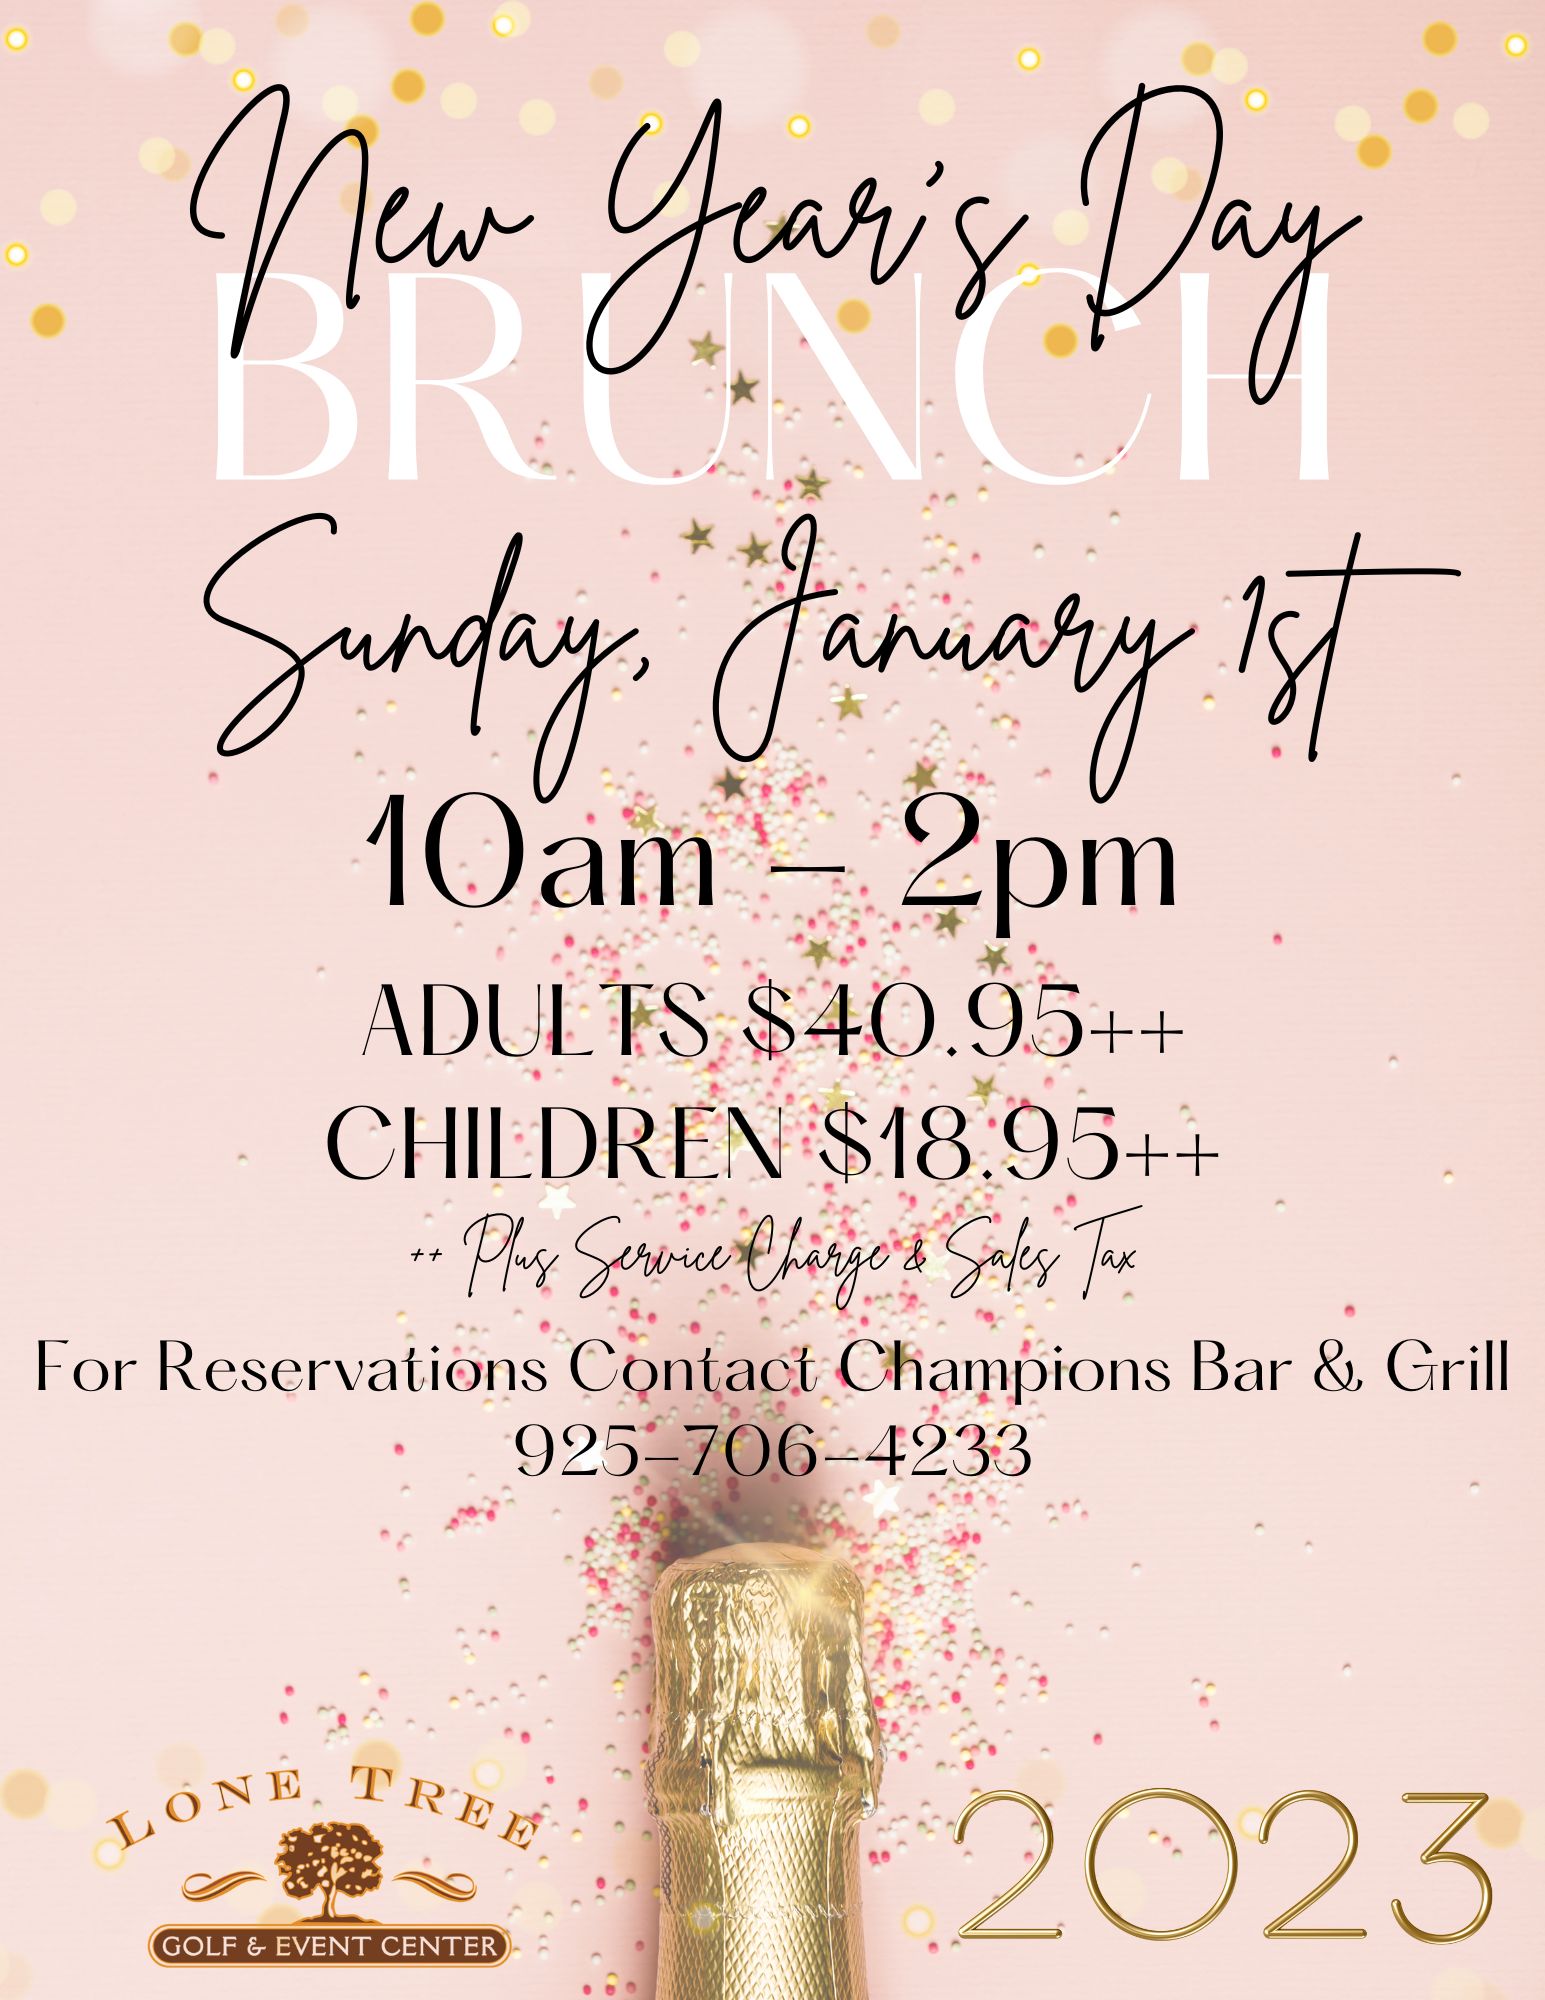 New Years Day Brunch 2023